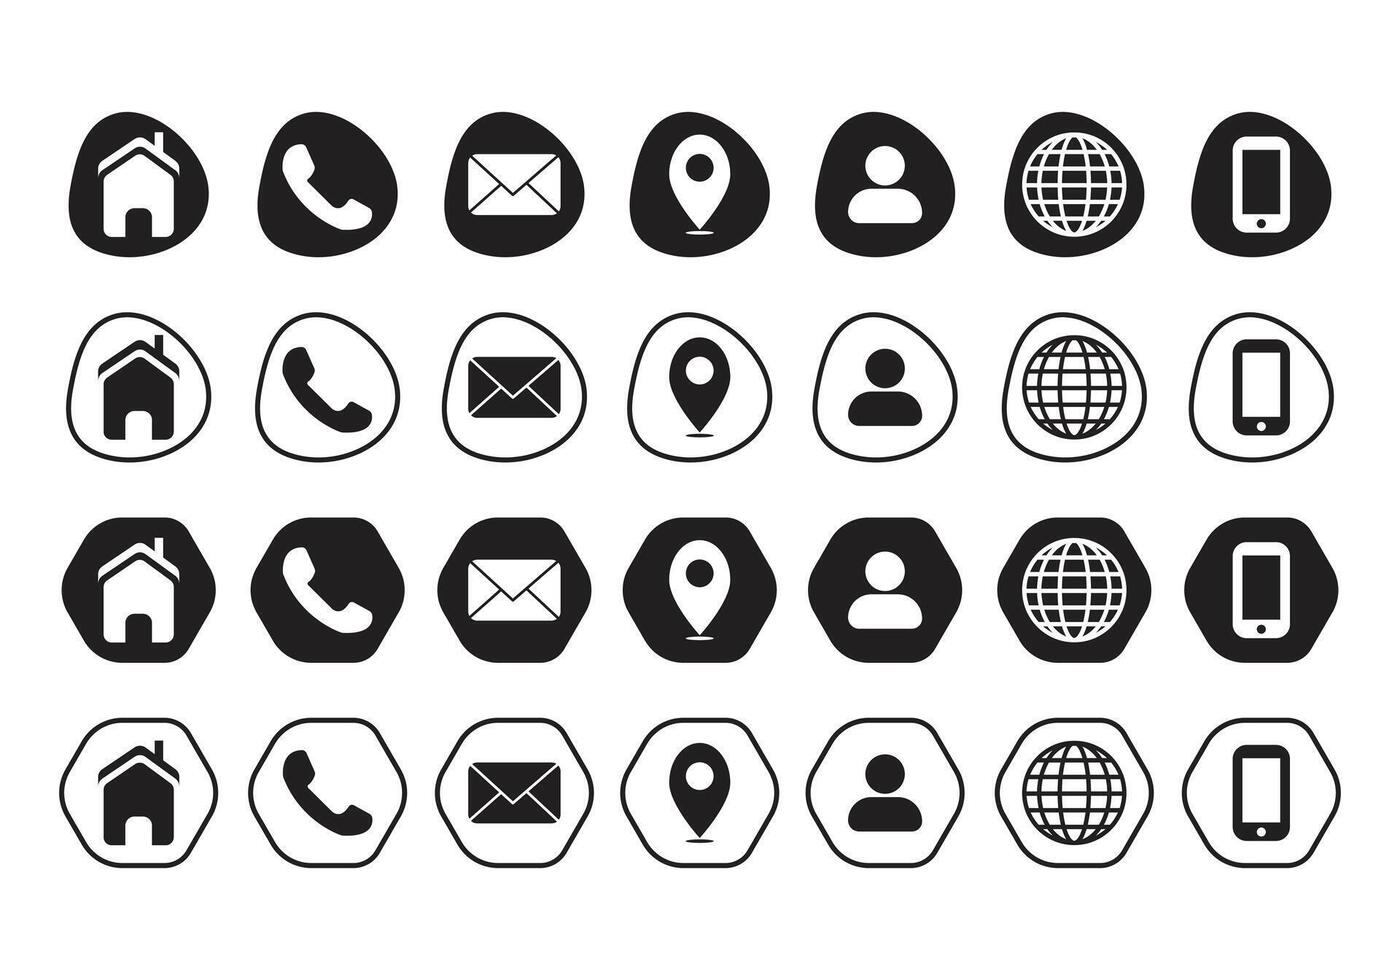 Contact related icon set, Essential Flat Stroke Circular Web Icon Set Phone Contact Location Button, Web icon, contact us icon, address, location, email, phone. Contact information symbols collection. vector